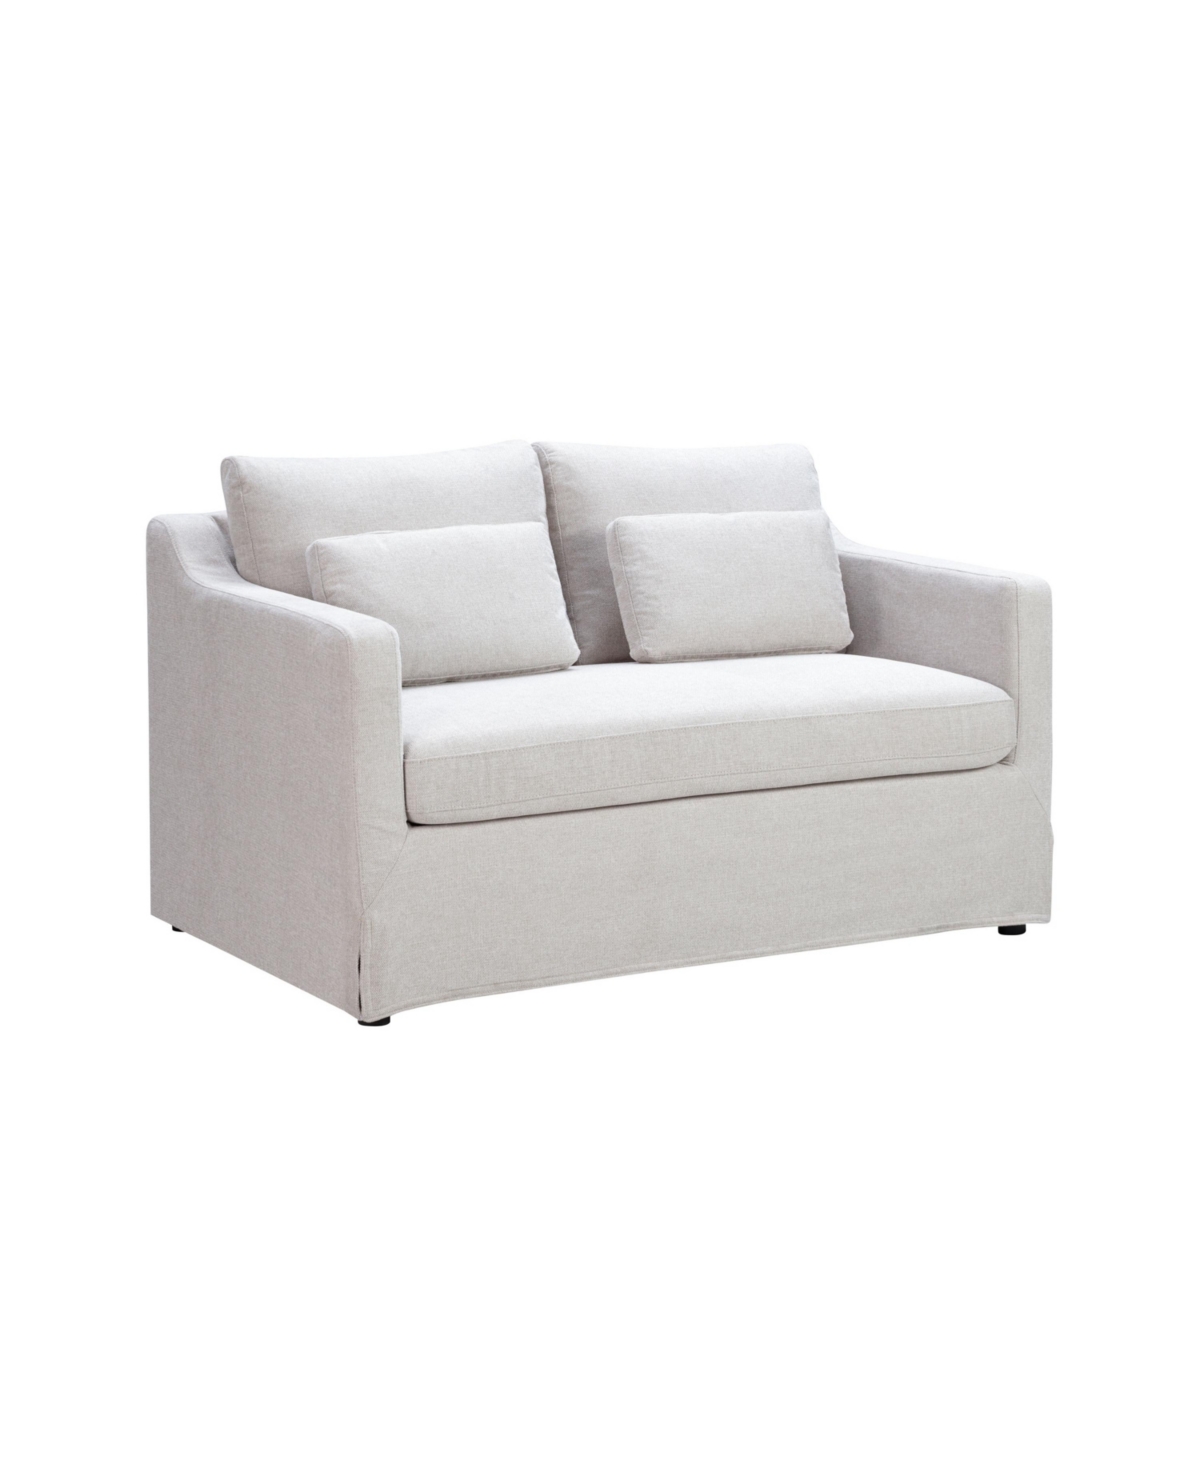 Lifestyle Solutions 58" Polyester Raleigh Loveseat In Oatmeal